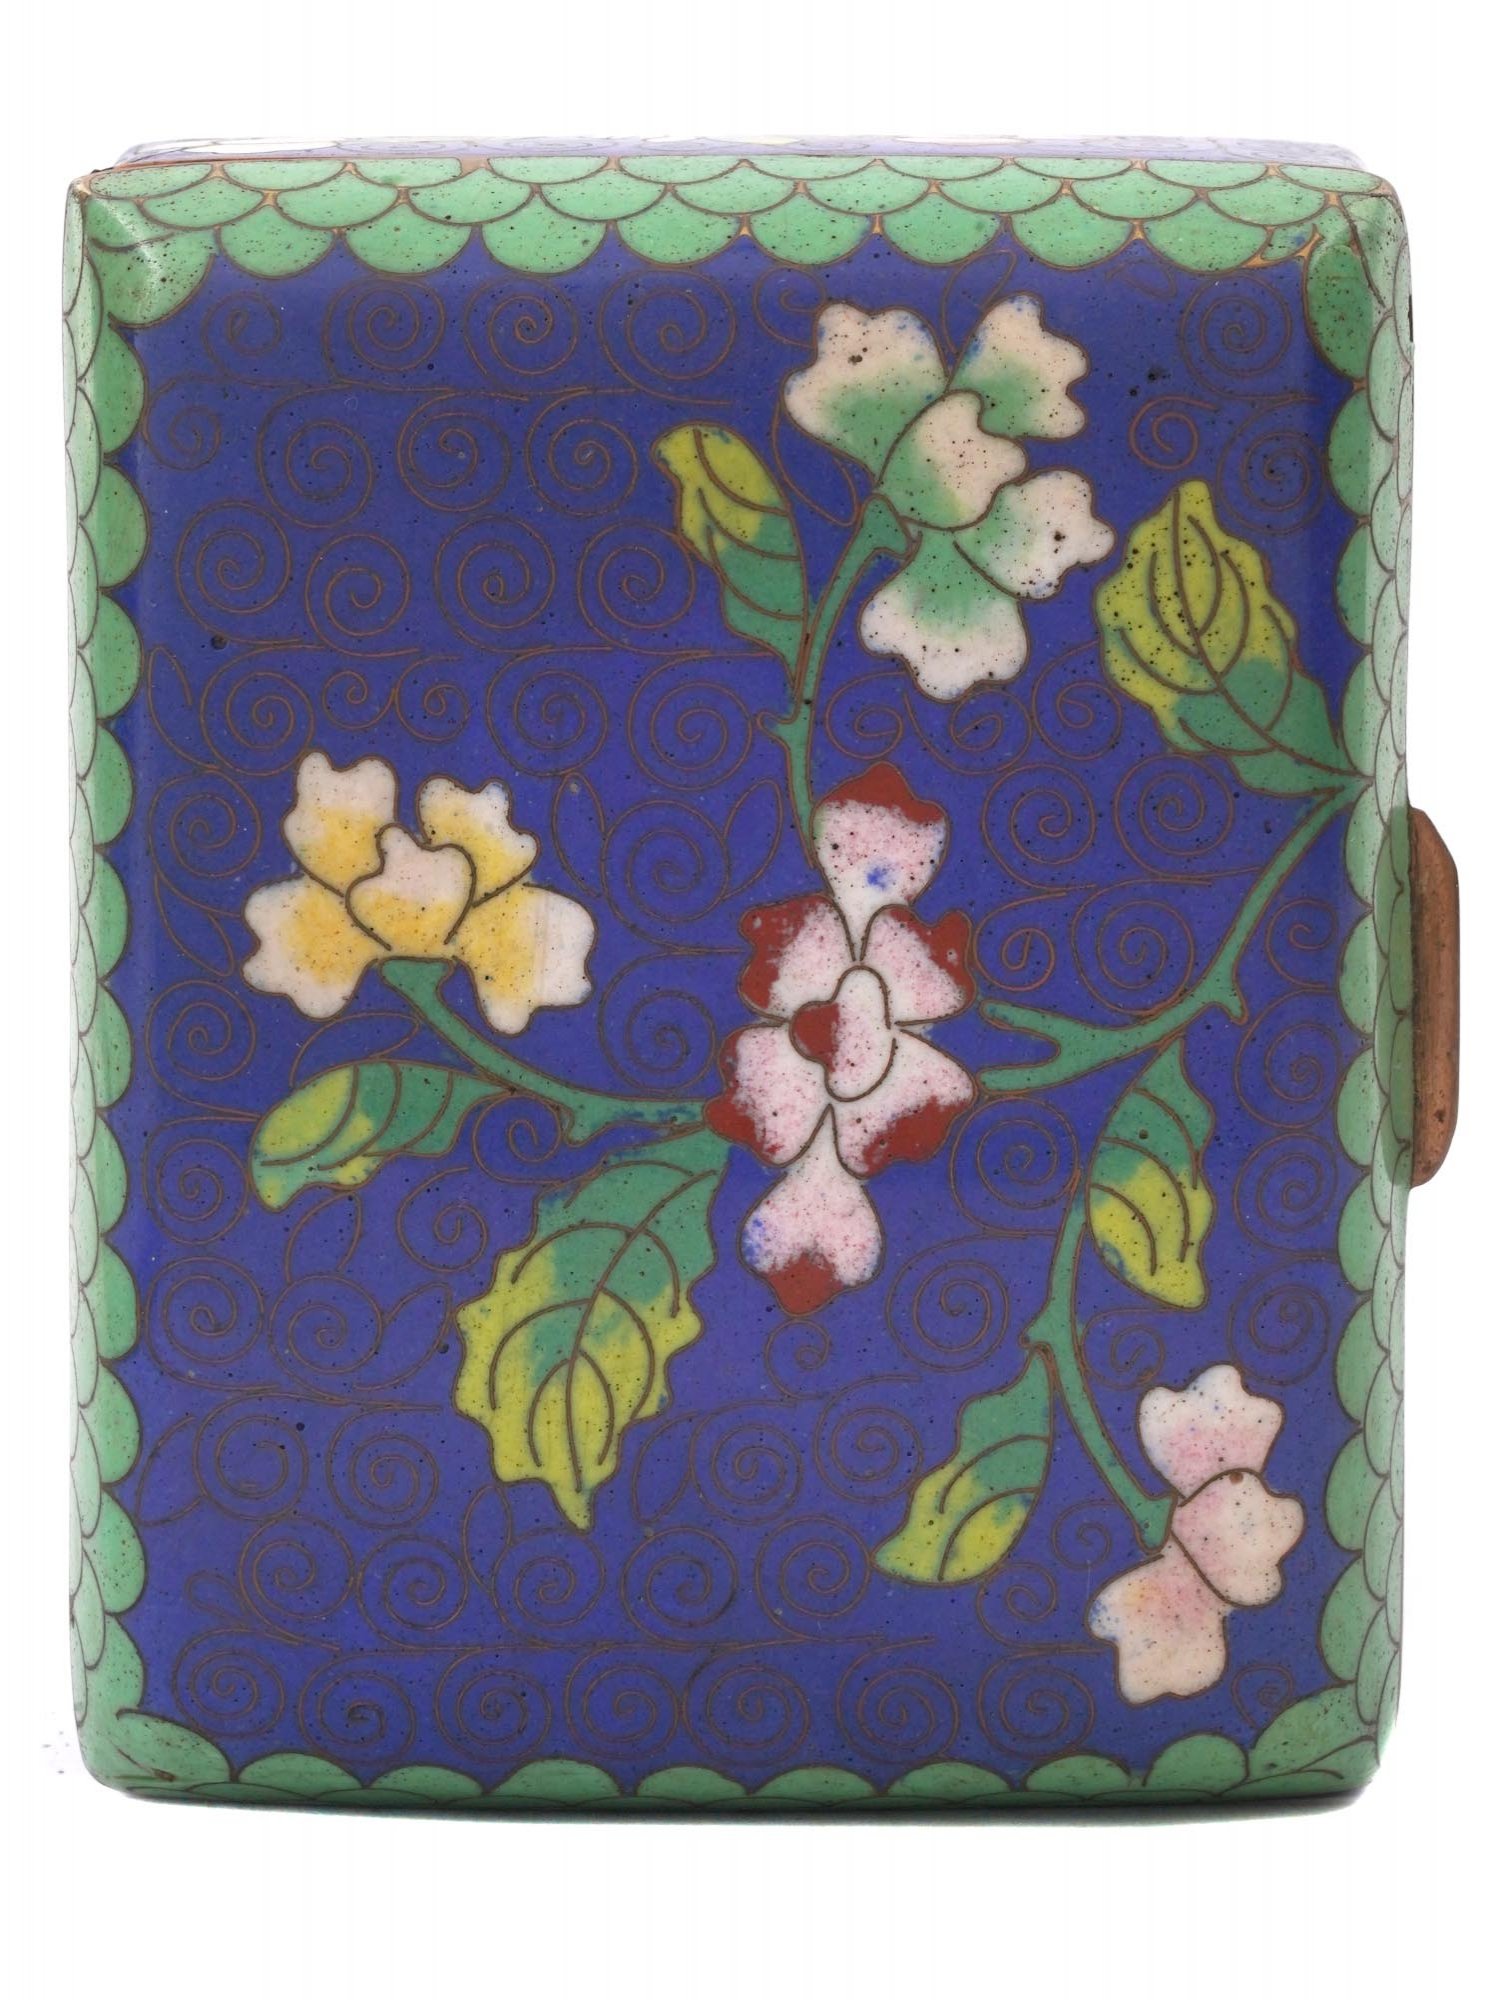 ANTIQUE CHINESE COVERED FLORAL CLOISONNE ENAMEL BOX PIC-6